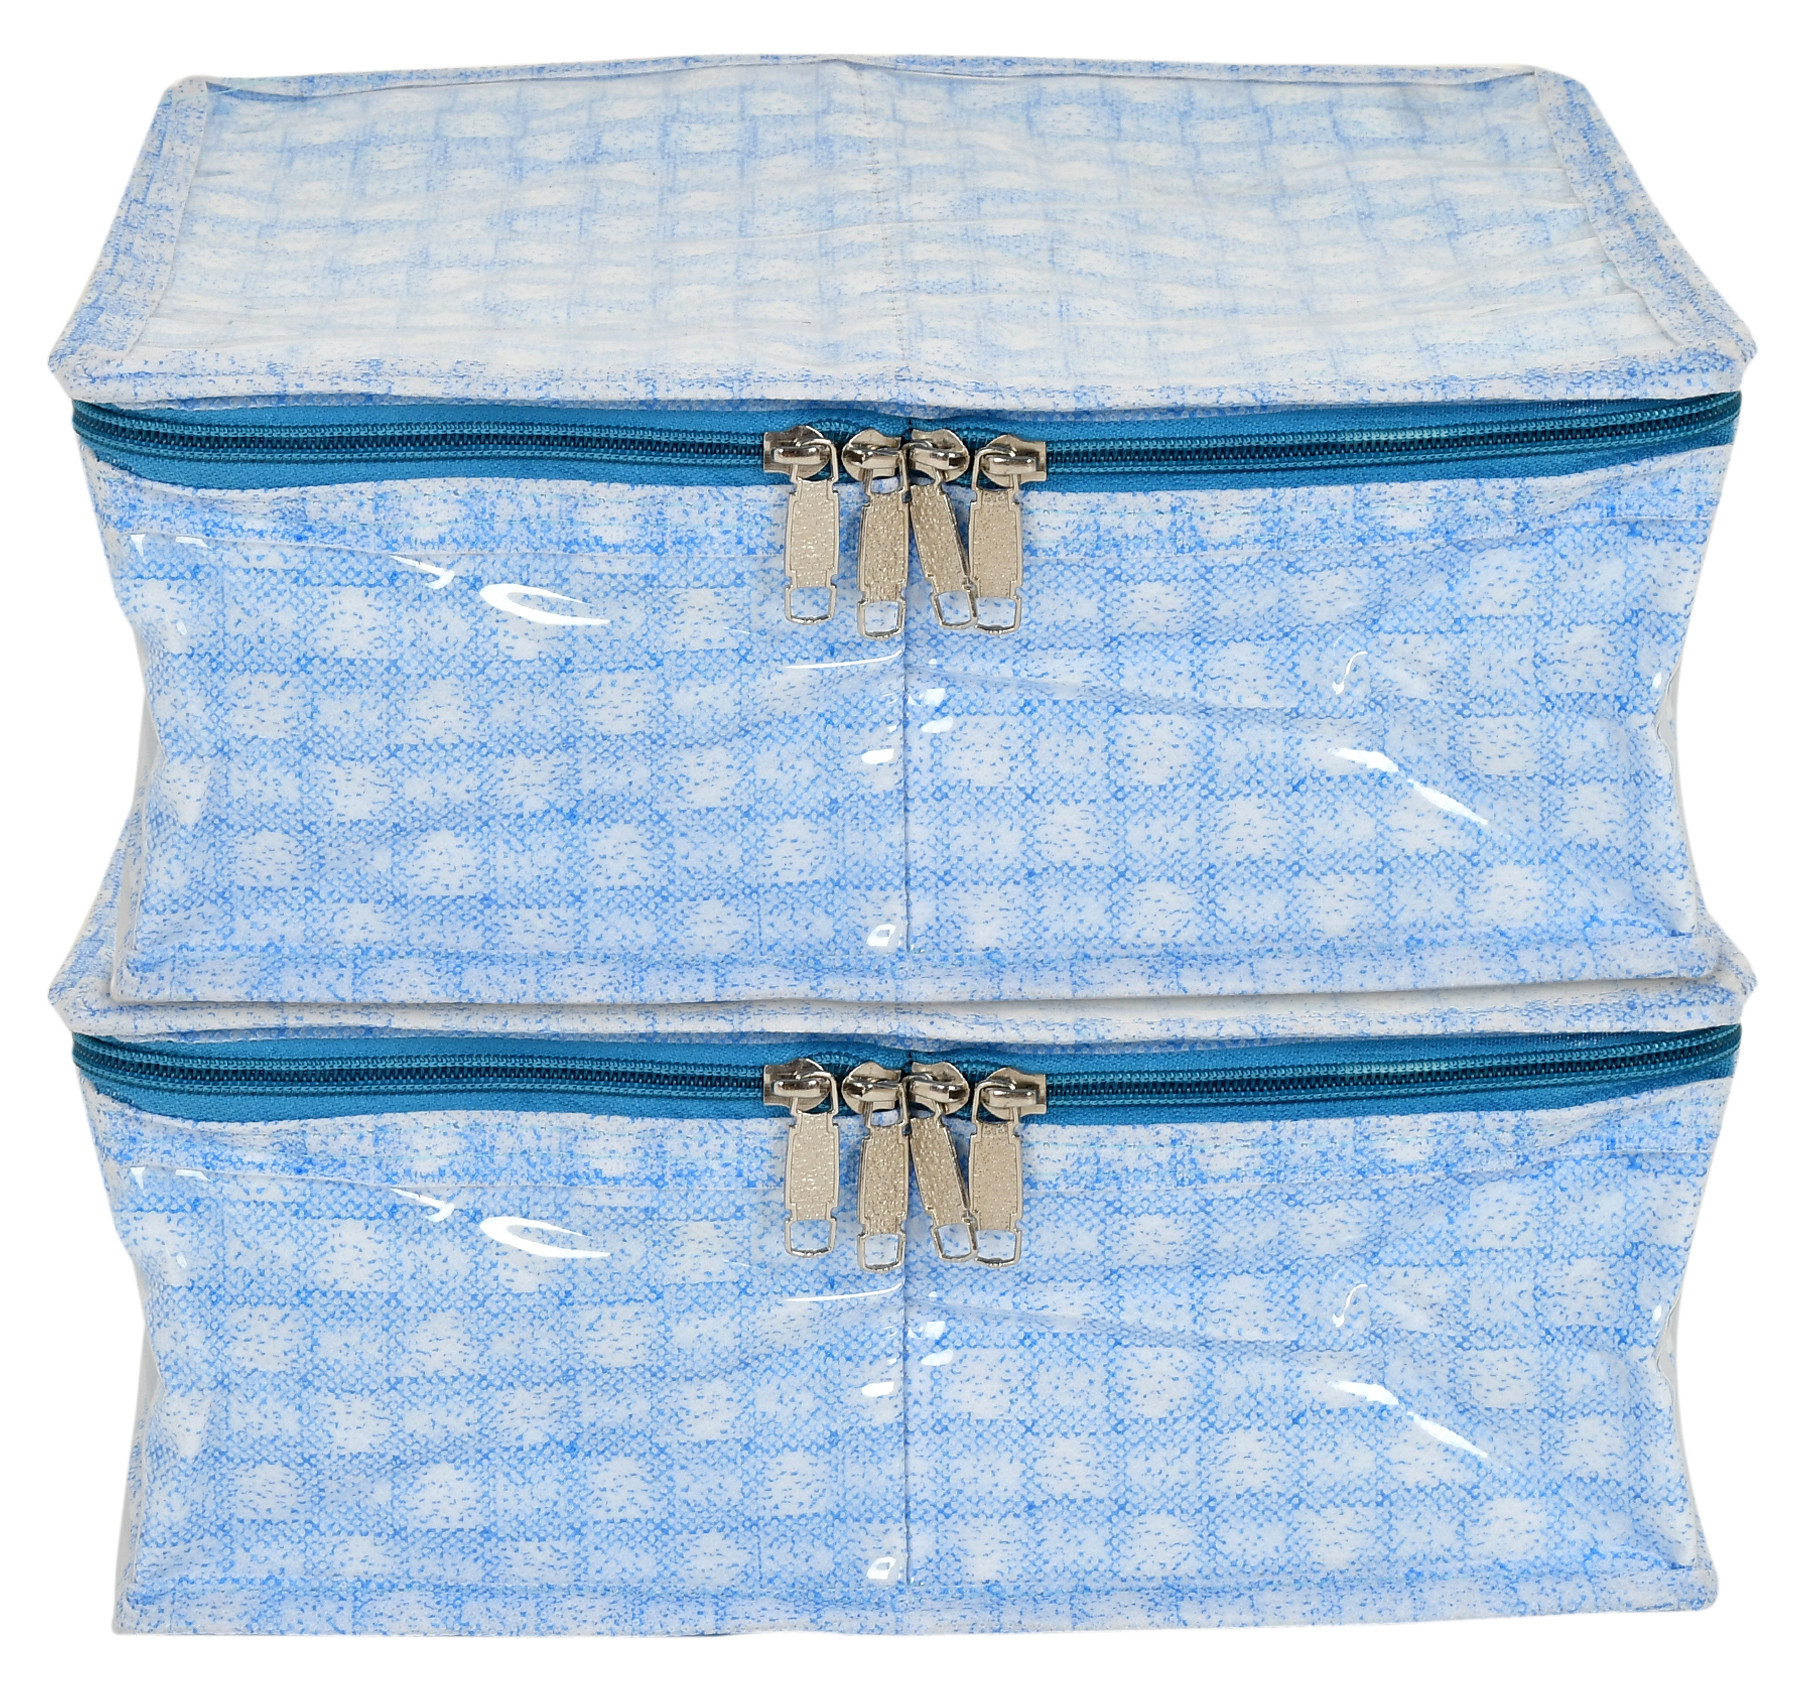 Kuber Industries Check Design Laminated PVC 2 Compartment Undergarments Organizer Bag, Storage Bag  Fits All Size Undergarments, Socks, Cosmetic, Toiletry kit With Tranasparent Window (Blue)-HS_38_KUBMART21265